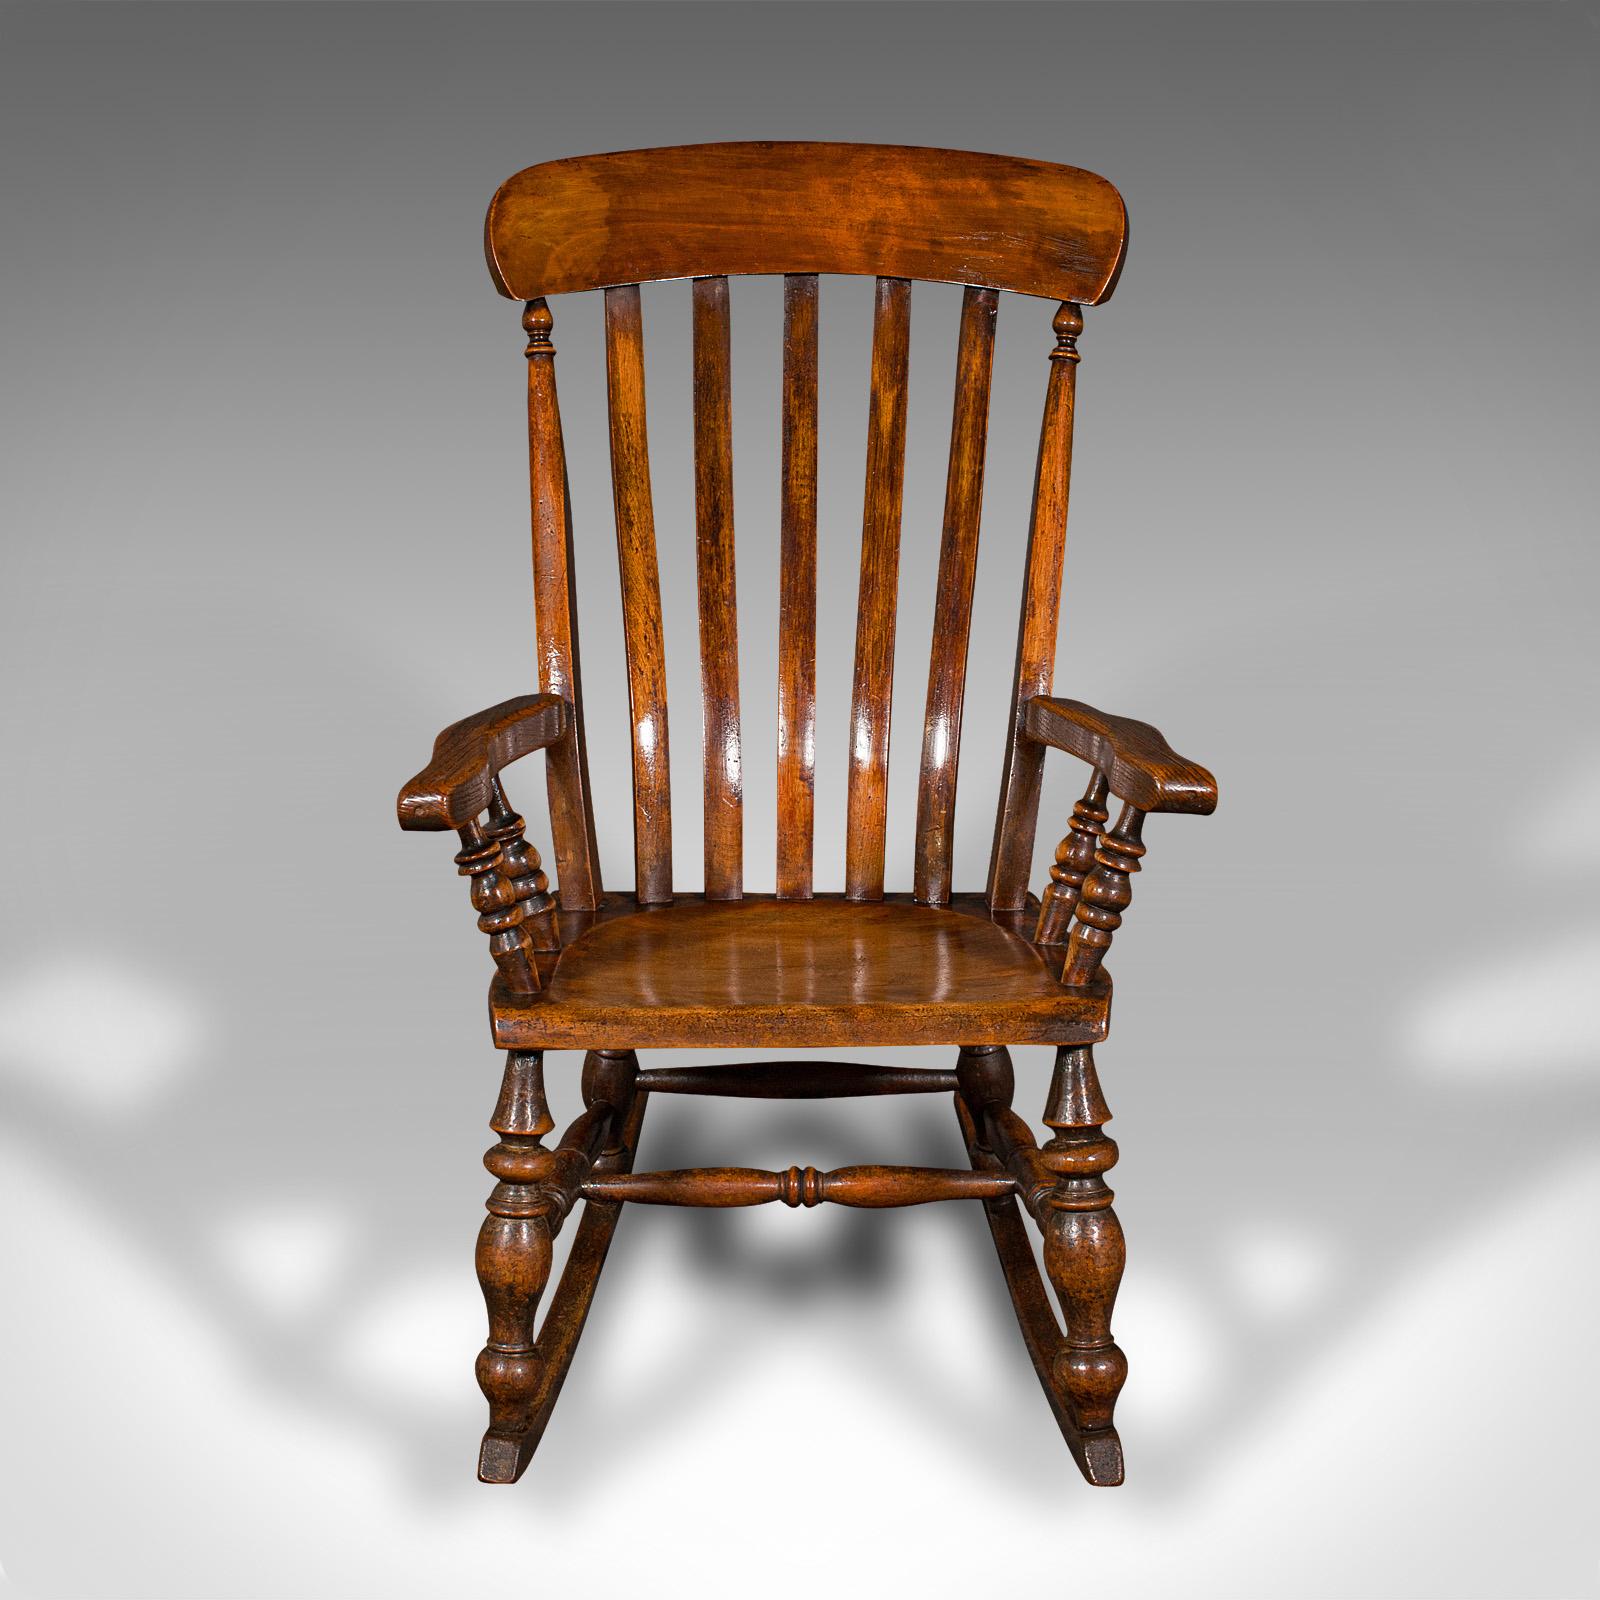 This is an antique lath back rocking chair. An English, elm and beech elbow seat, dating to the late Victorian period, circa 1880.

Superb Victorian craftsmanship to this traditionally appealing rocker
Displays a desirable aged patina and in good